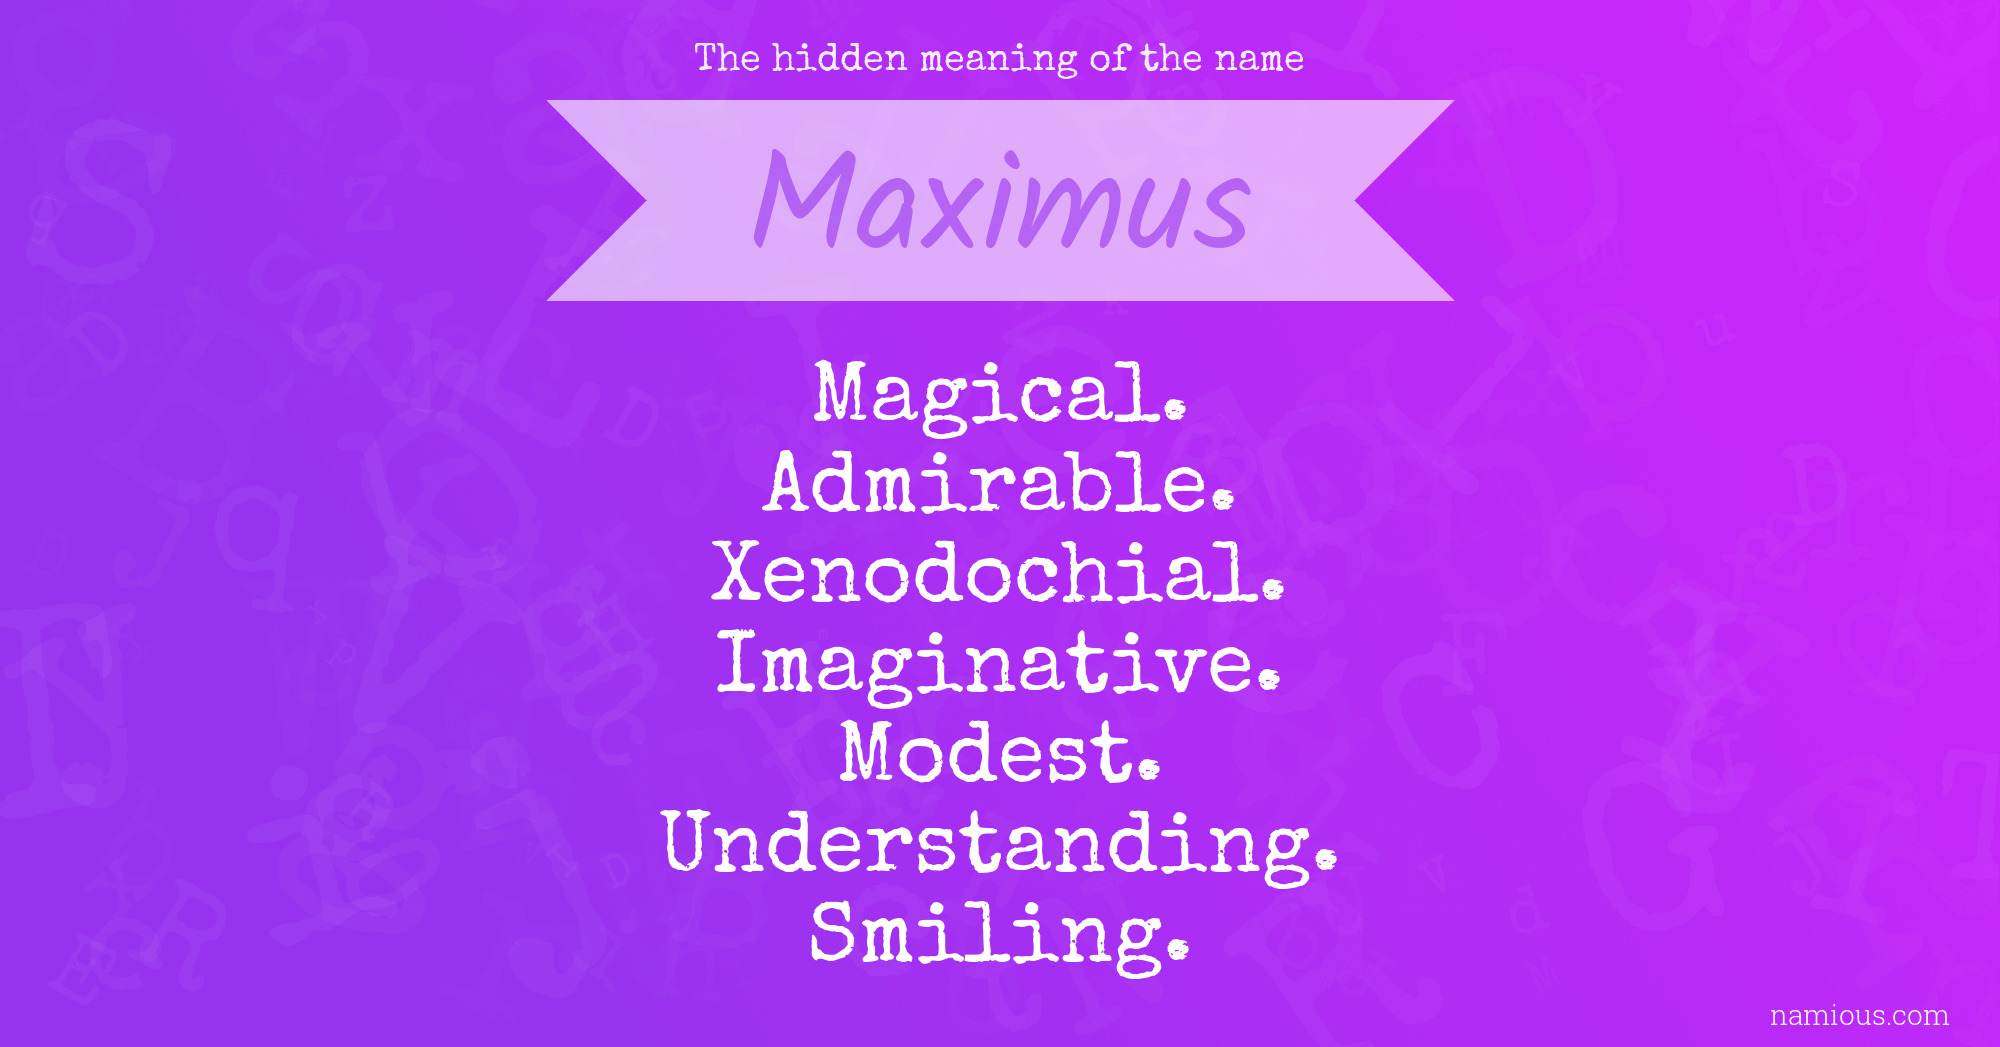 The hidden meaning of the name Maximus